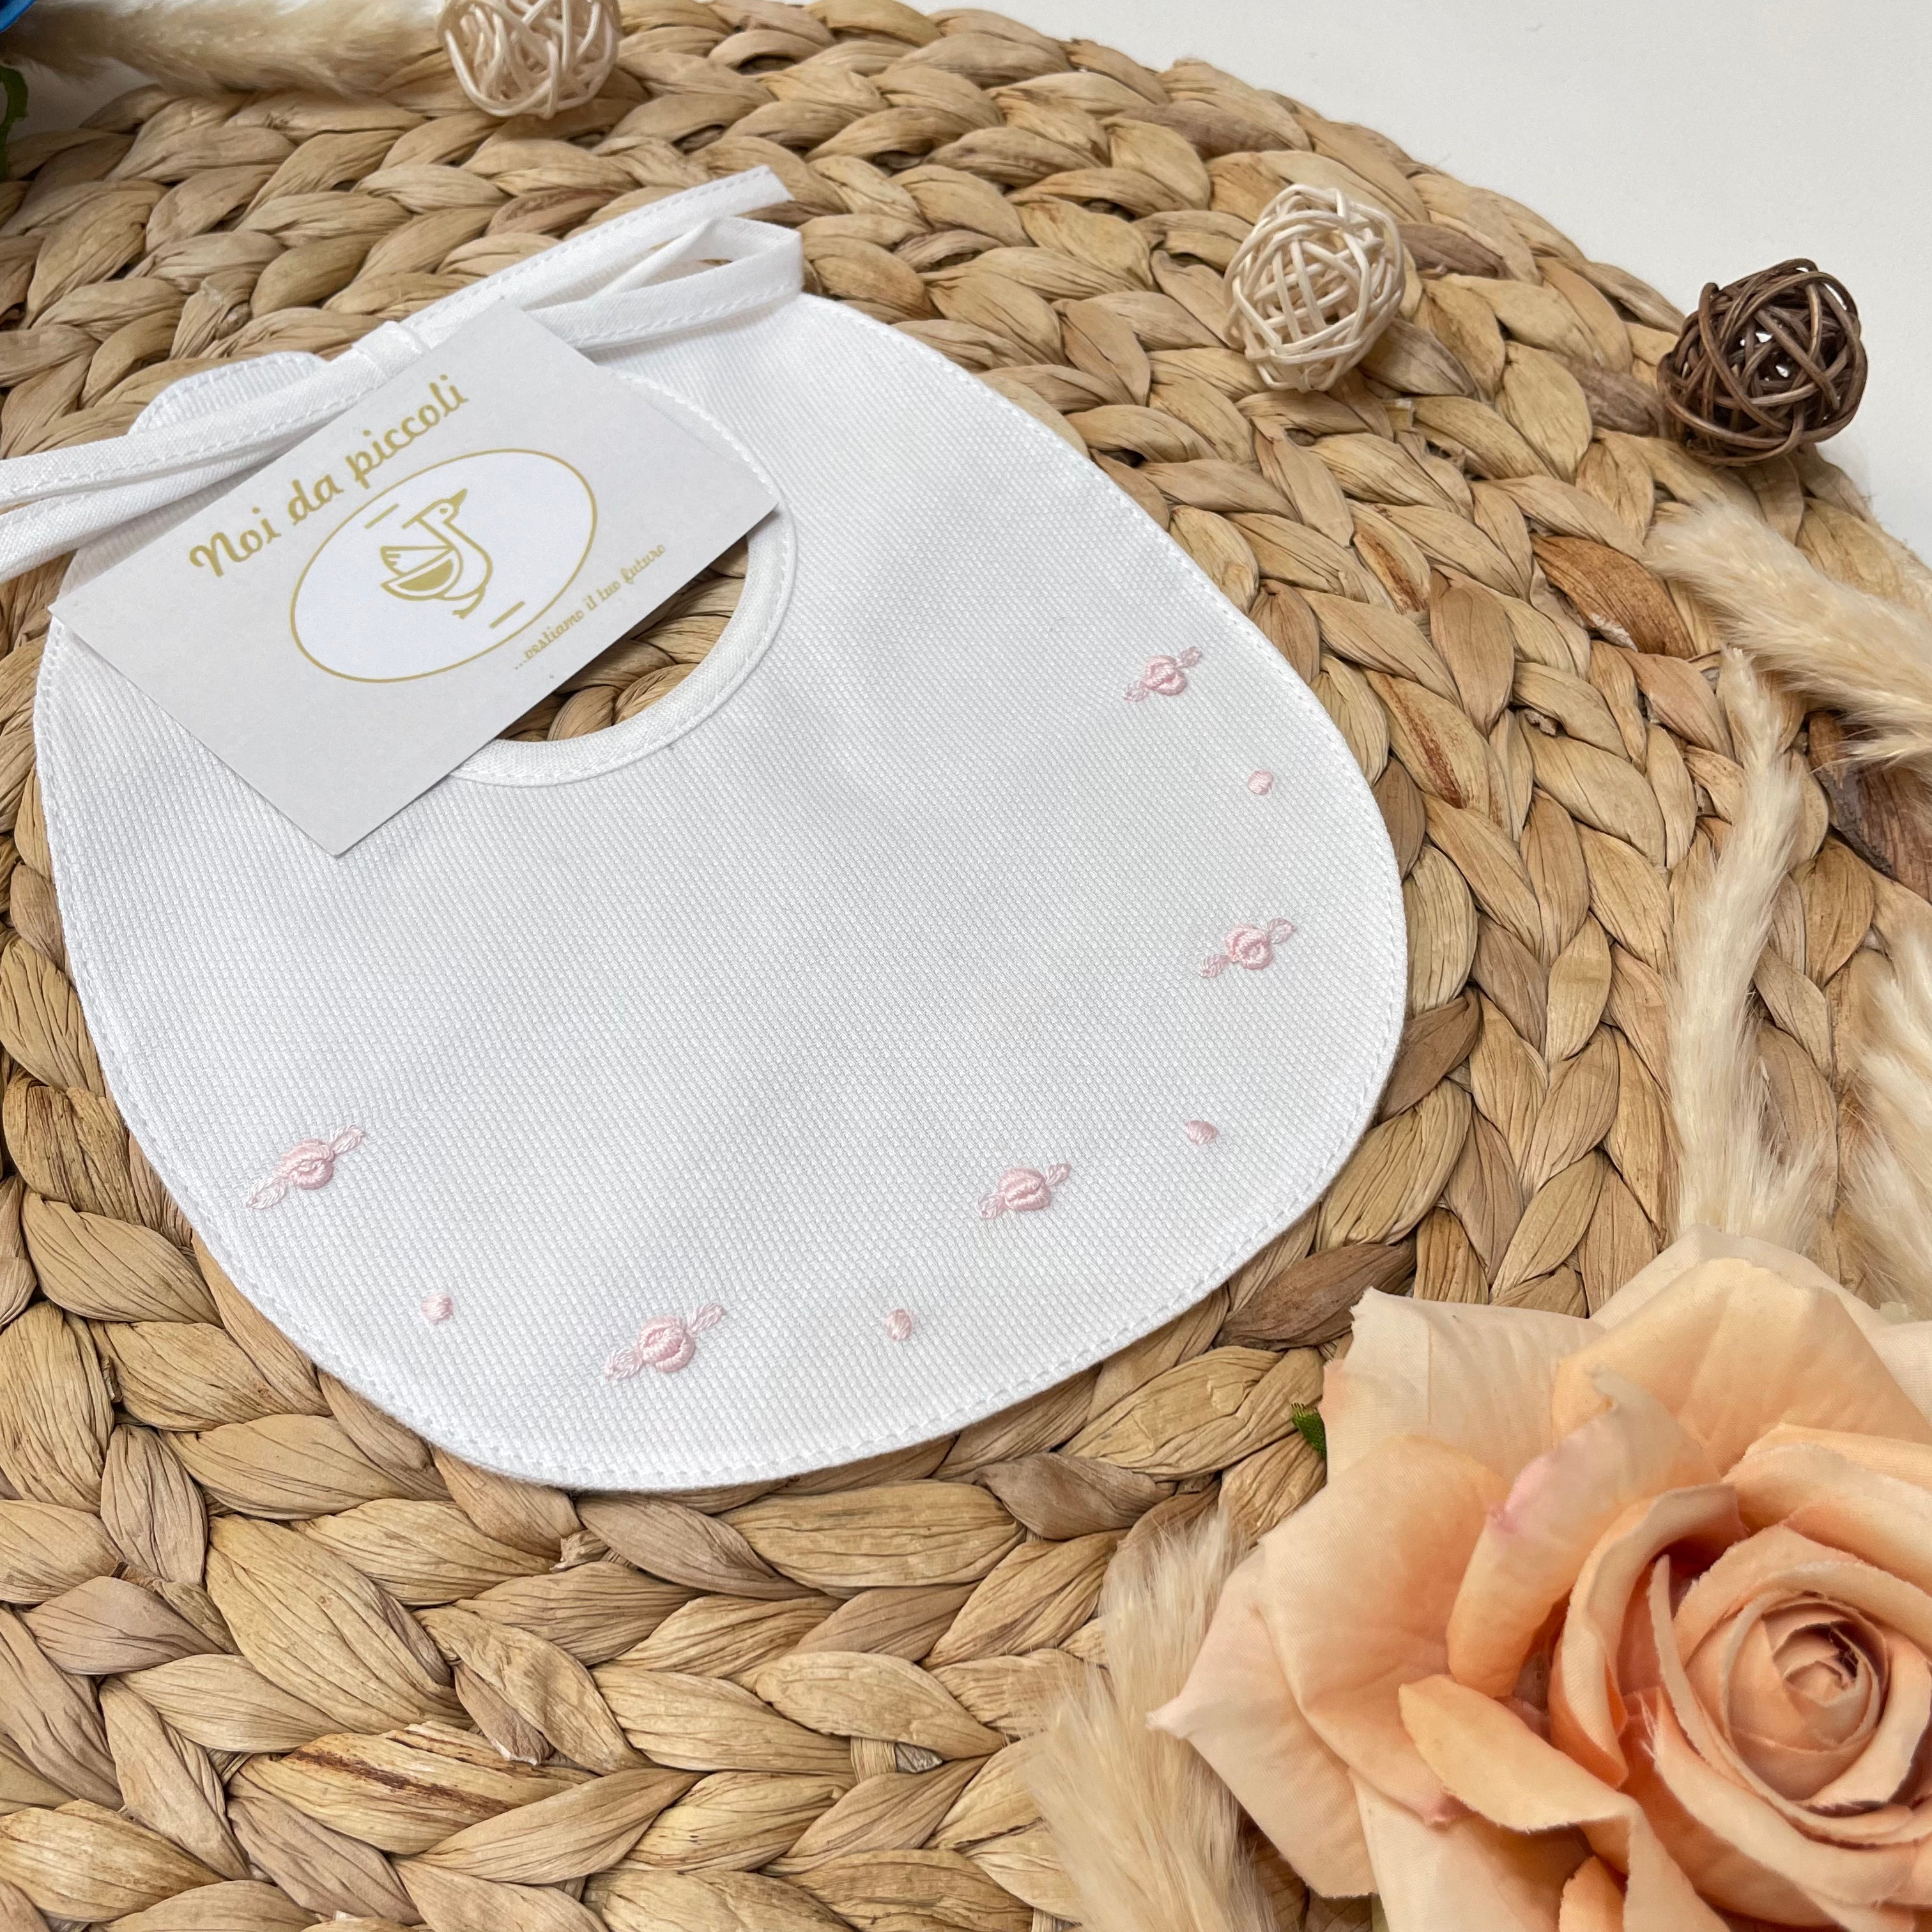 WHITE HAND EMBROIDERED BIB WITH PINK ROSELLINES